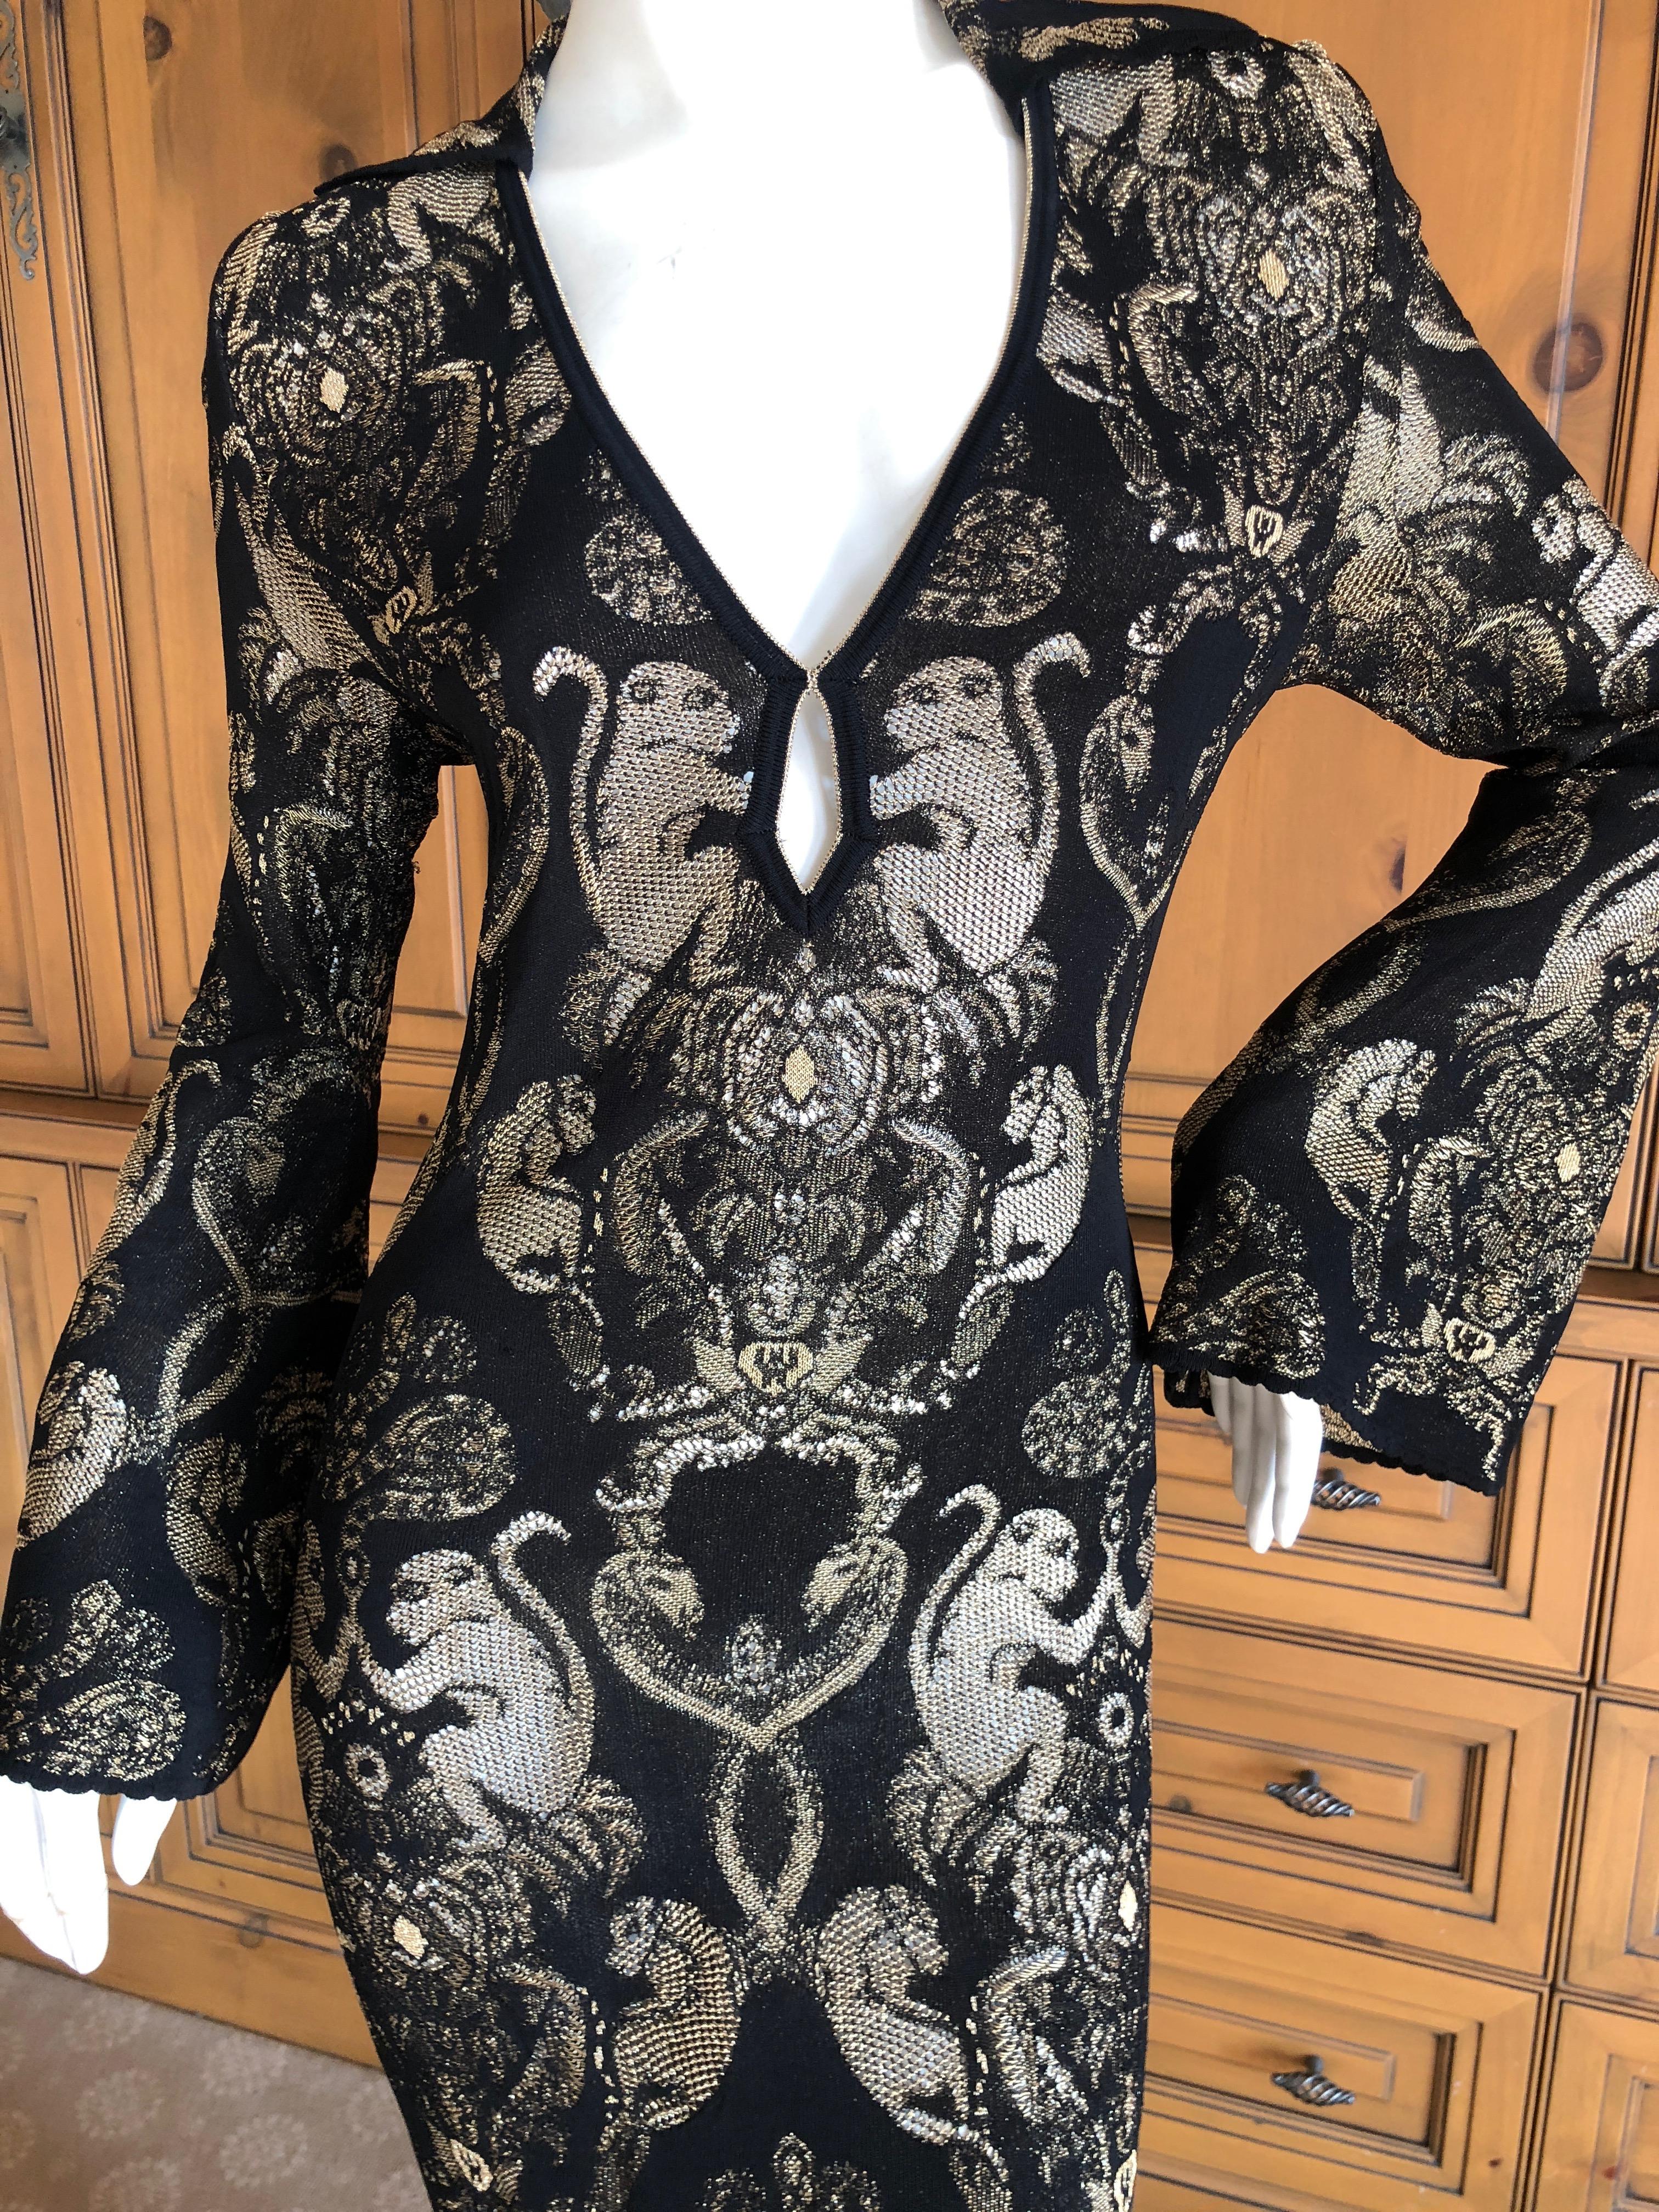 Roberto Cavalli Vintage Golden Monkey Pattern Low Cut Keyhole Knit Evening Dress In Excellent Condition For Sale In Cloverdale, CA